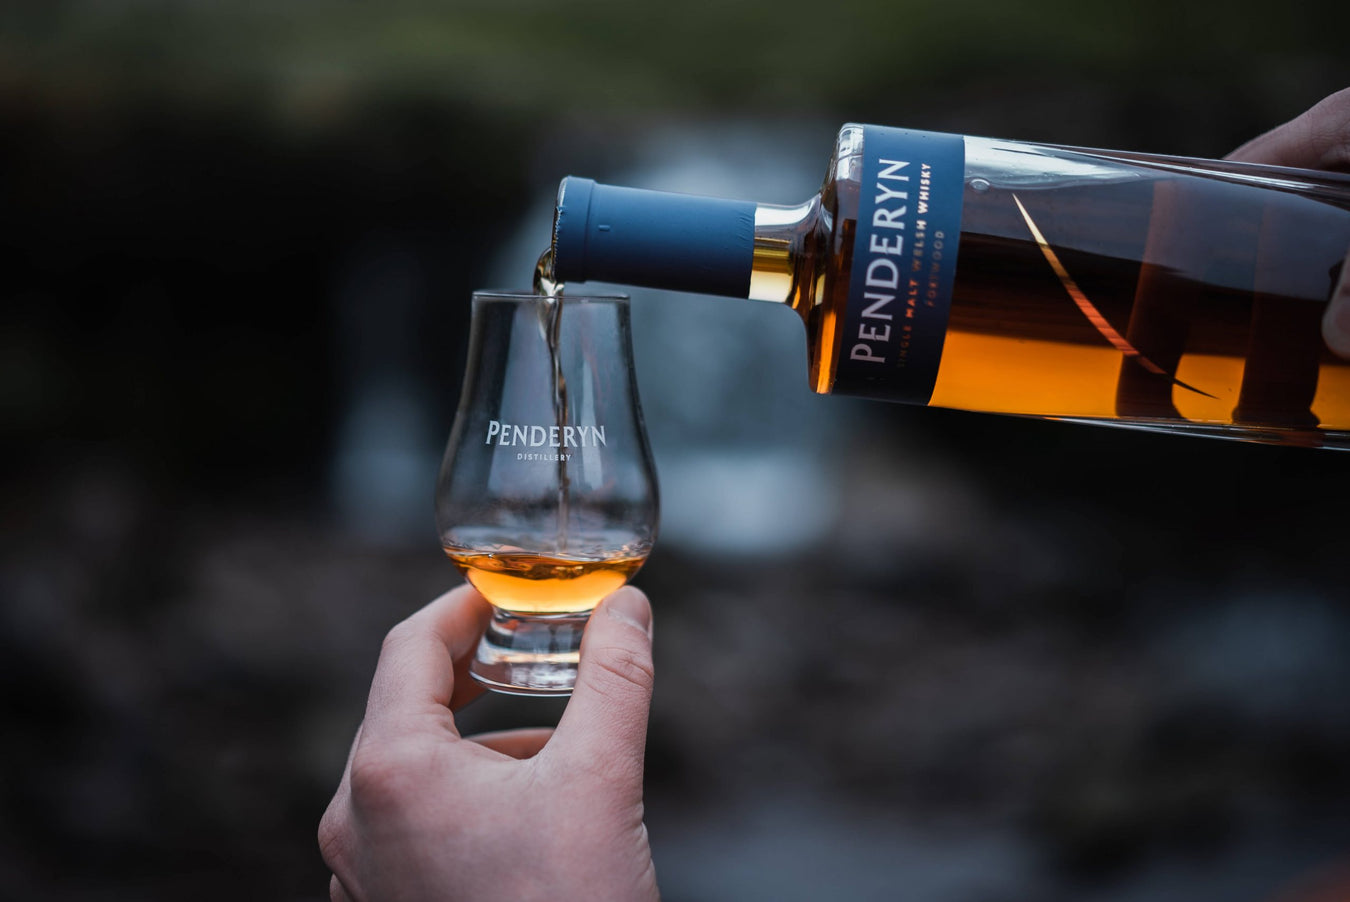 Welsh Whisky Father's Day Gifts